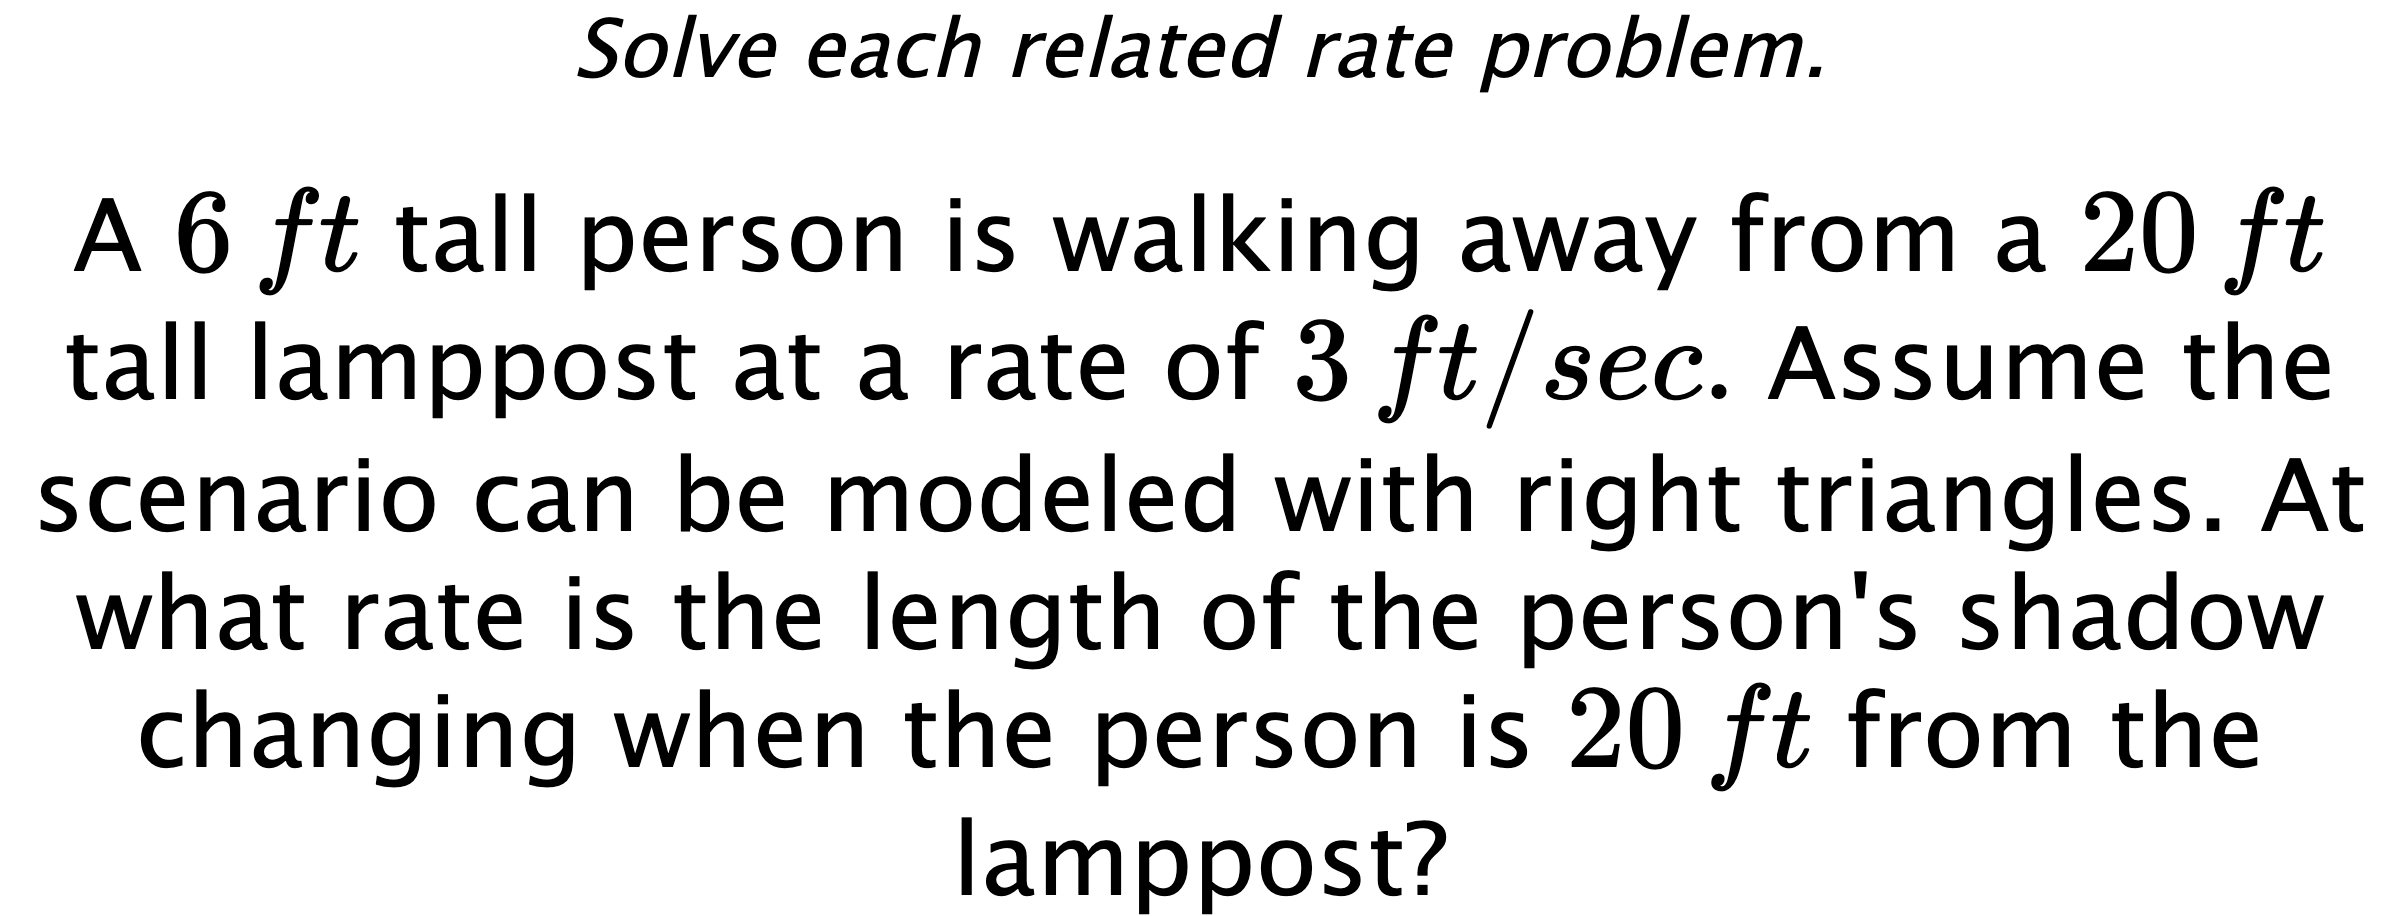 Solve each related rate problem. A $6\,ft$ tall person is walking away from a $20\,ft$ tall lamppost at a rate of $3\,ft/sec.$ Assume the scenario can be modeled with right triangles. At what rate is the length of the person's shadow changing when the person is $20\,ft$ from the lamppost?